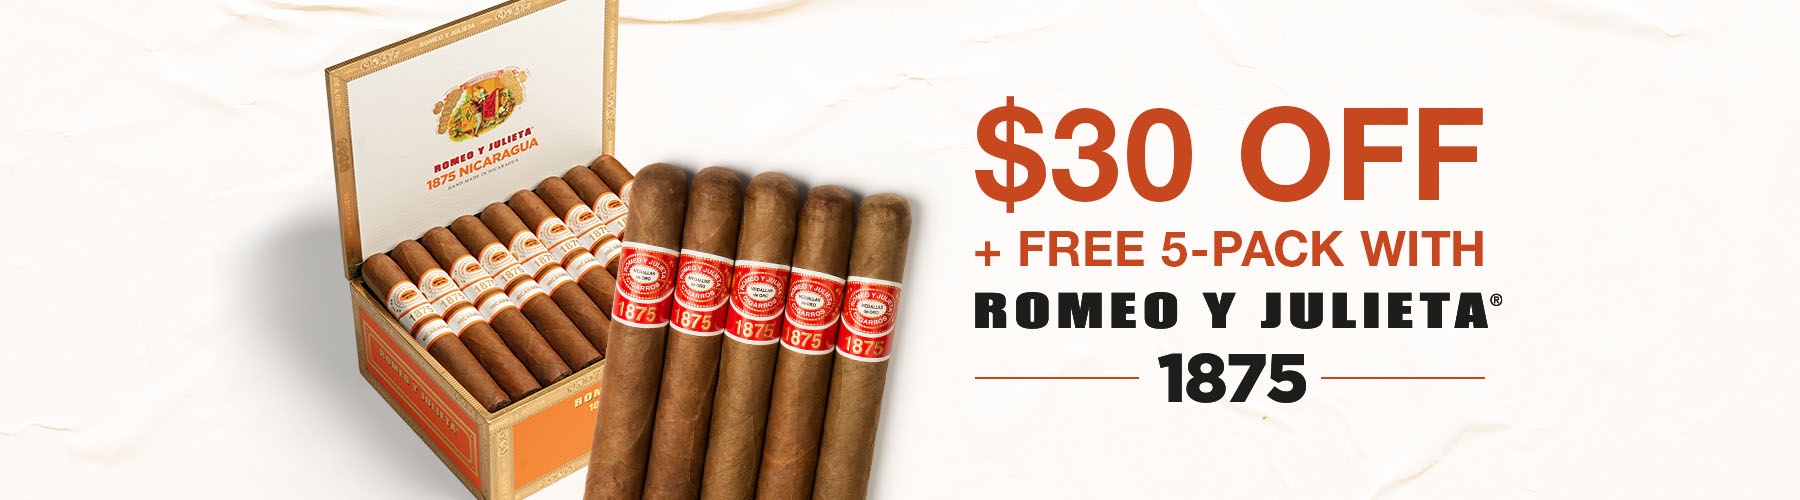 $30 off + free 5-pack with Romeo y Julieta 1875!